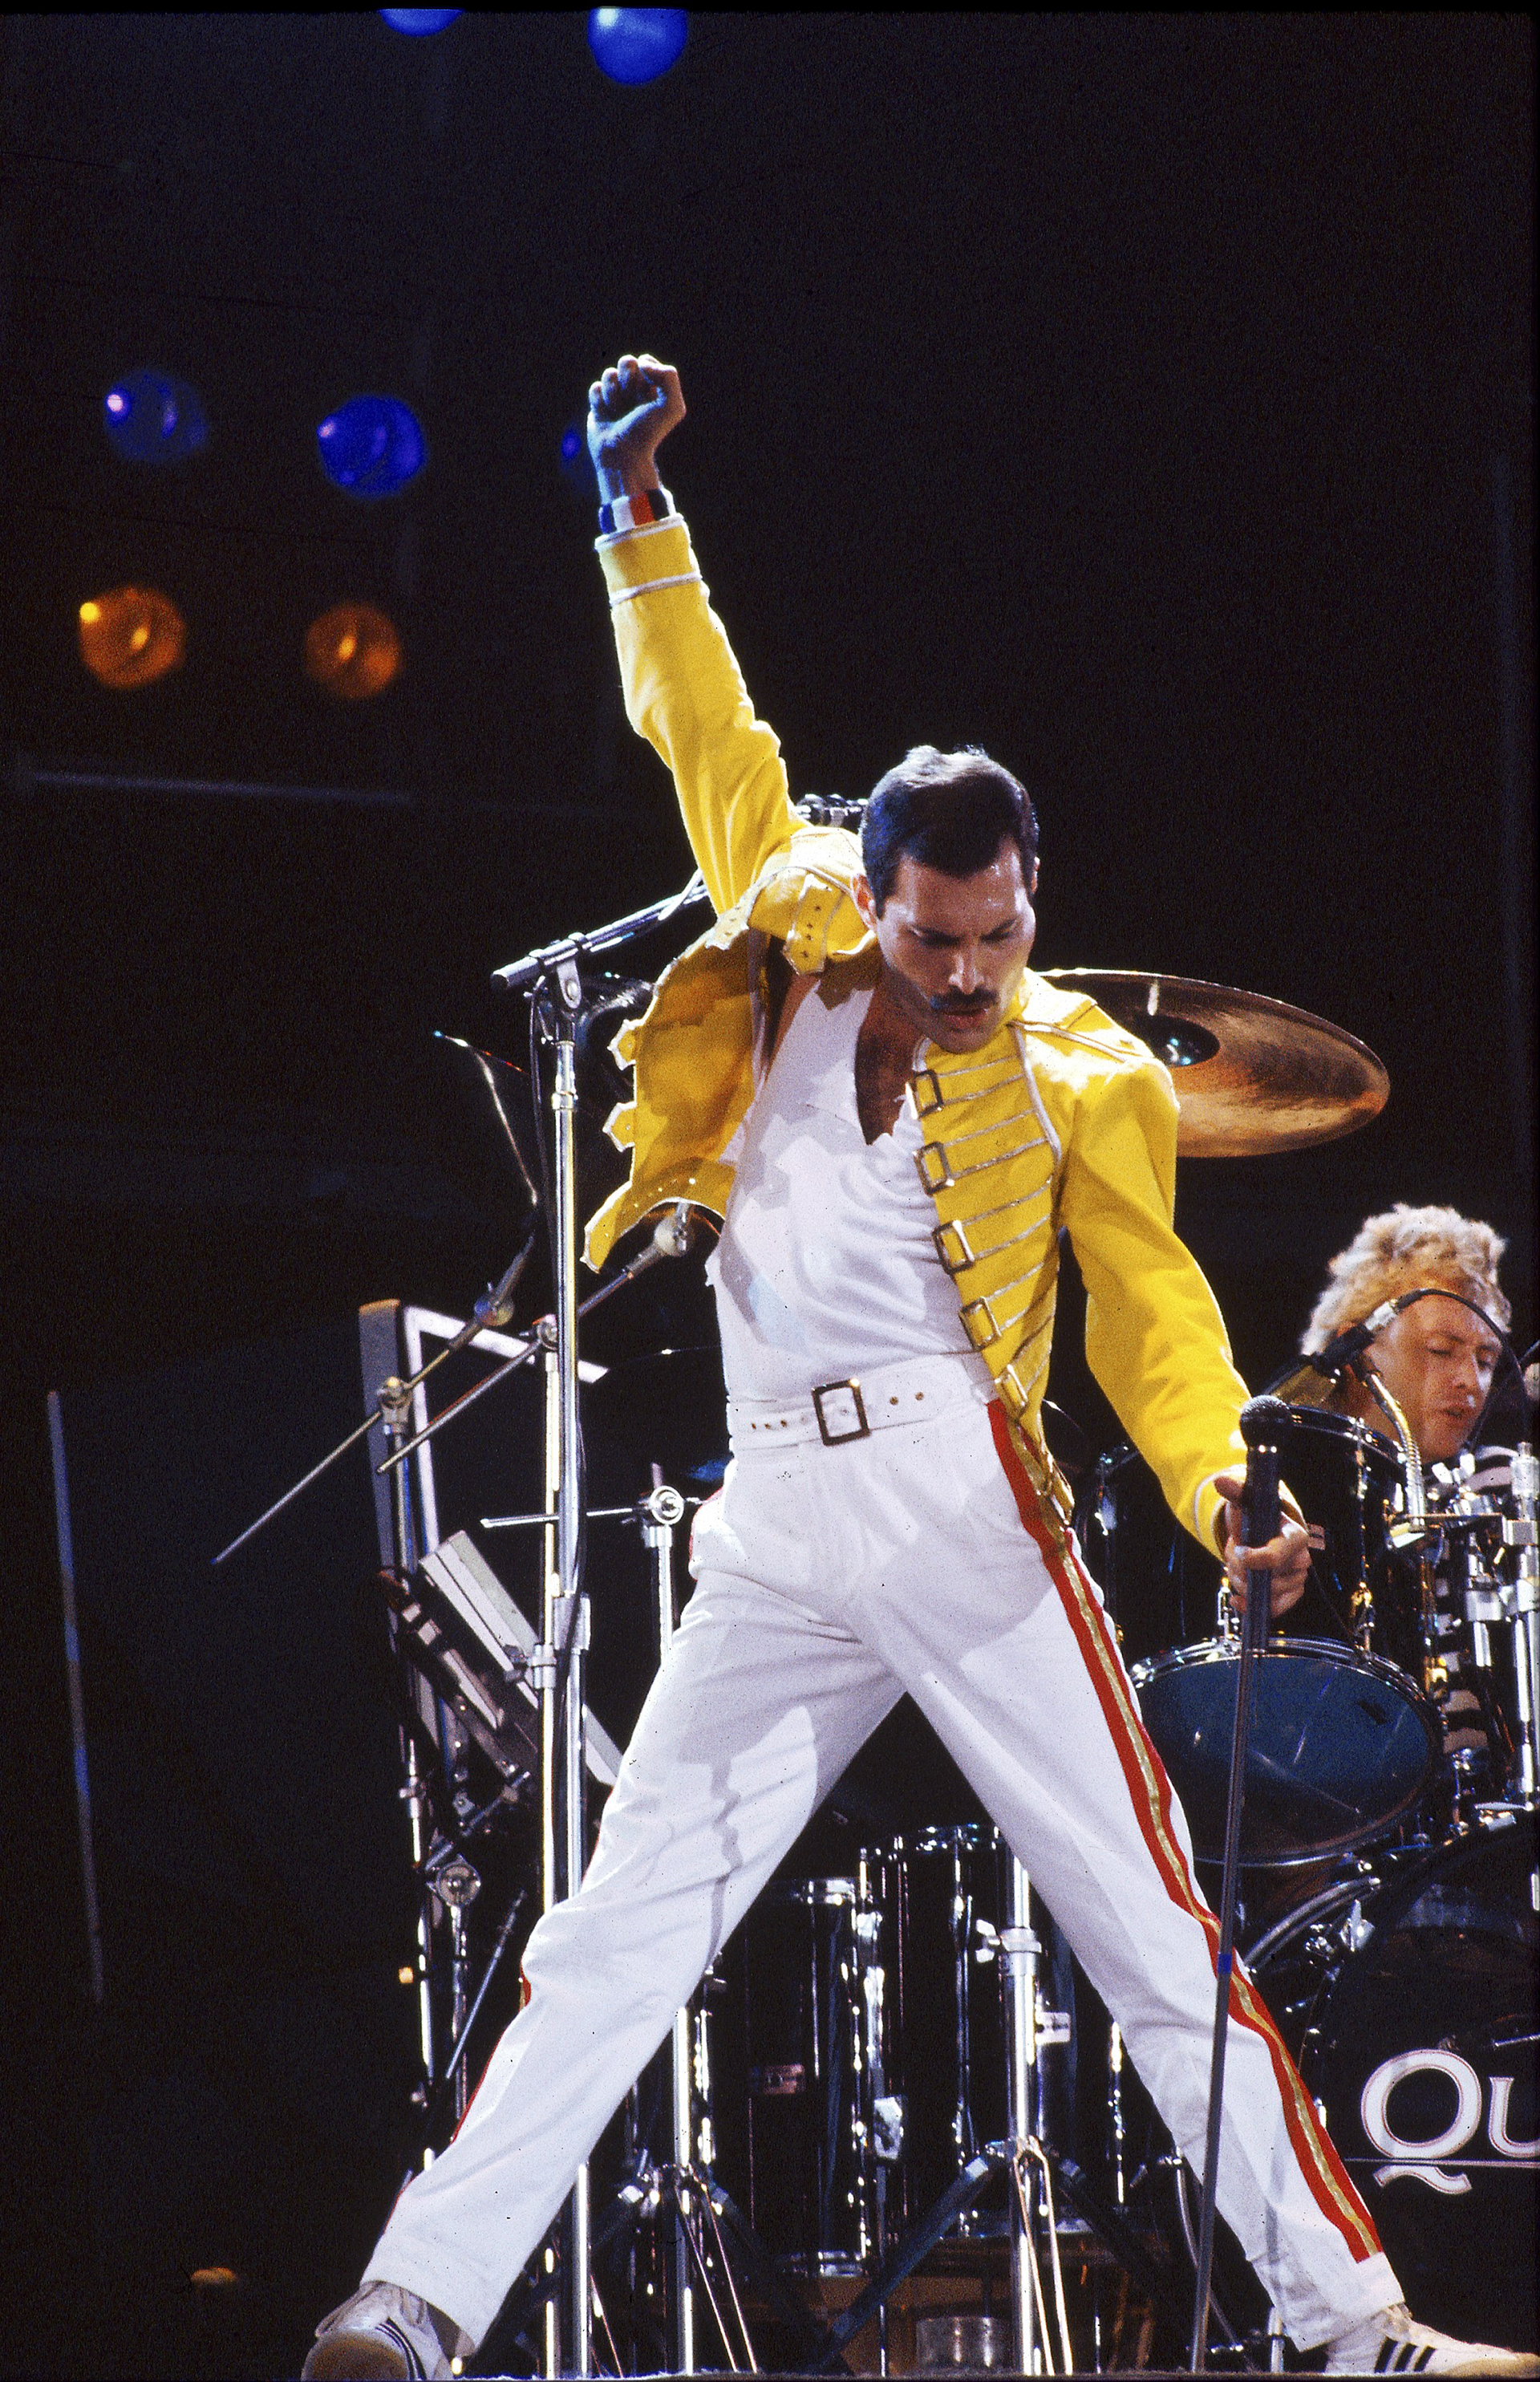 UNITED KINGDOM - AUGUST 09:  KNEBWORTH  Photo of Freddie MERCURY and QUEEN, Freddie Mercury performing live on stage.  Roger Taylor is in the background.  (Photo by Suzie Gibbons/Redferns)